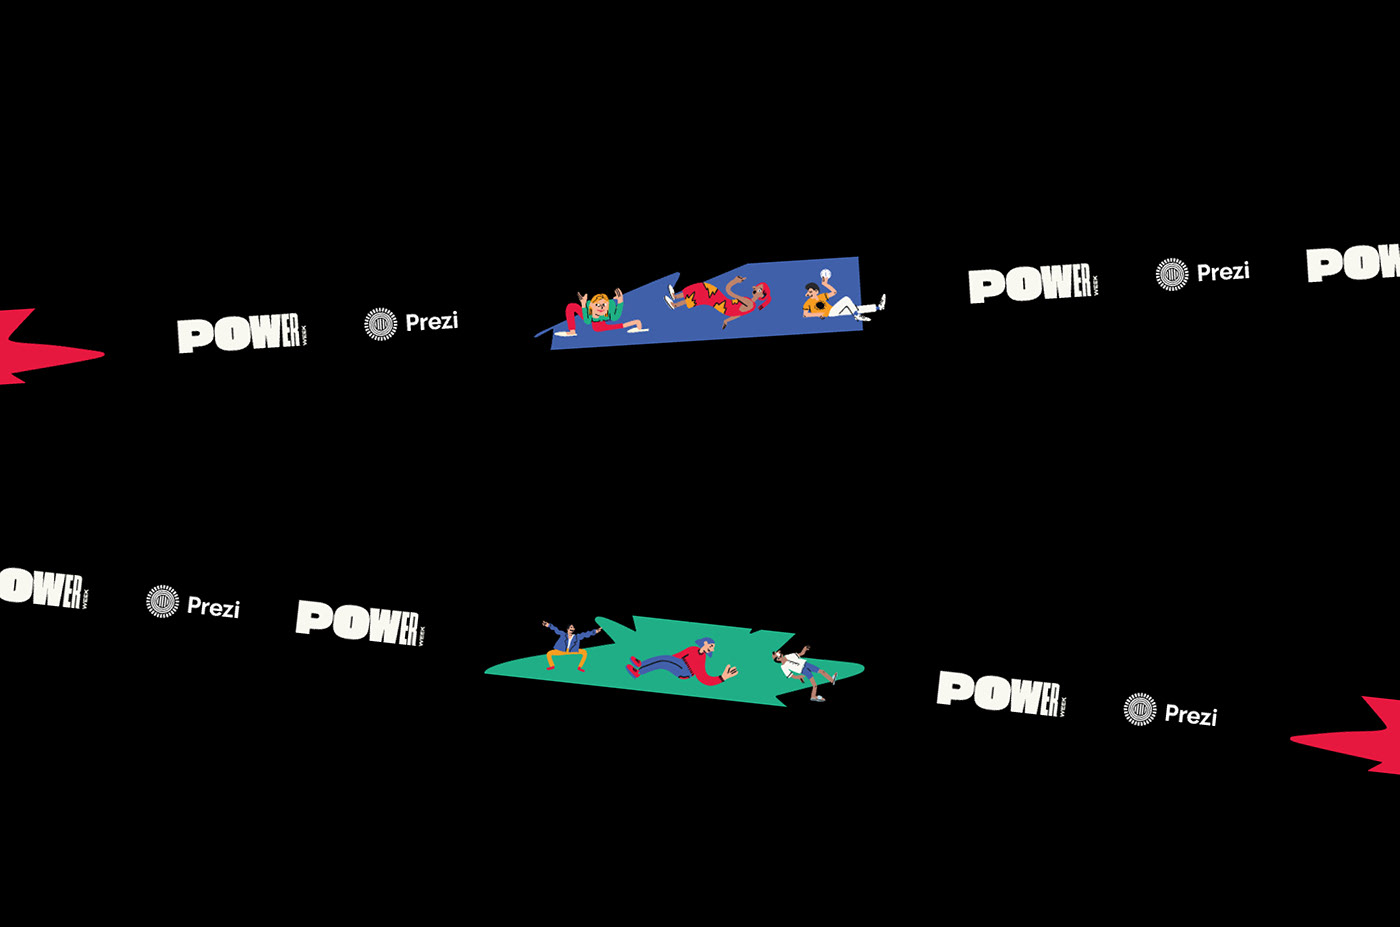 power up Event party conference animation  ILLUSTRATION  colours design